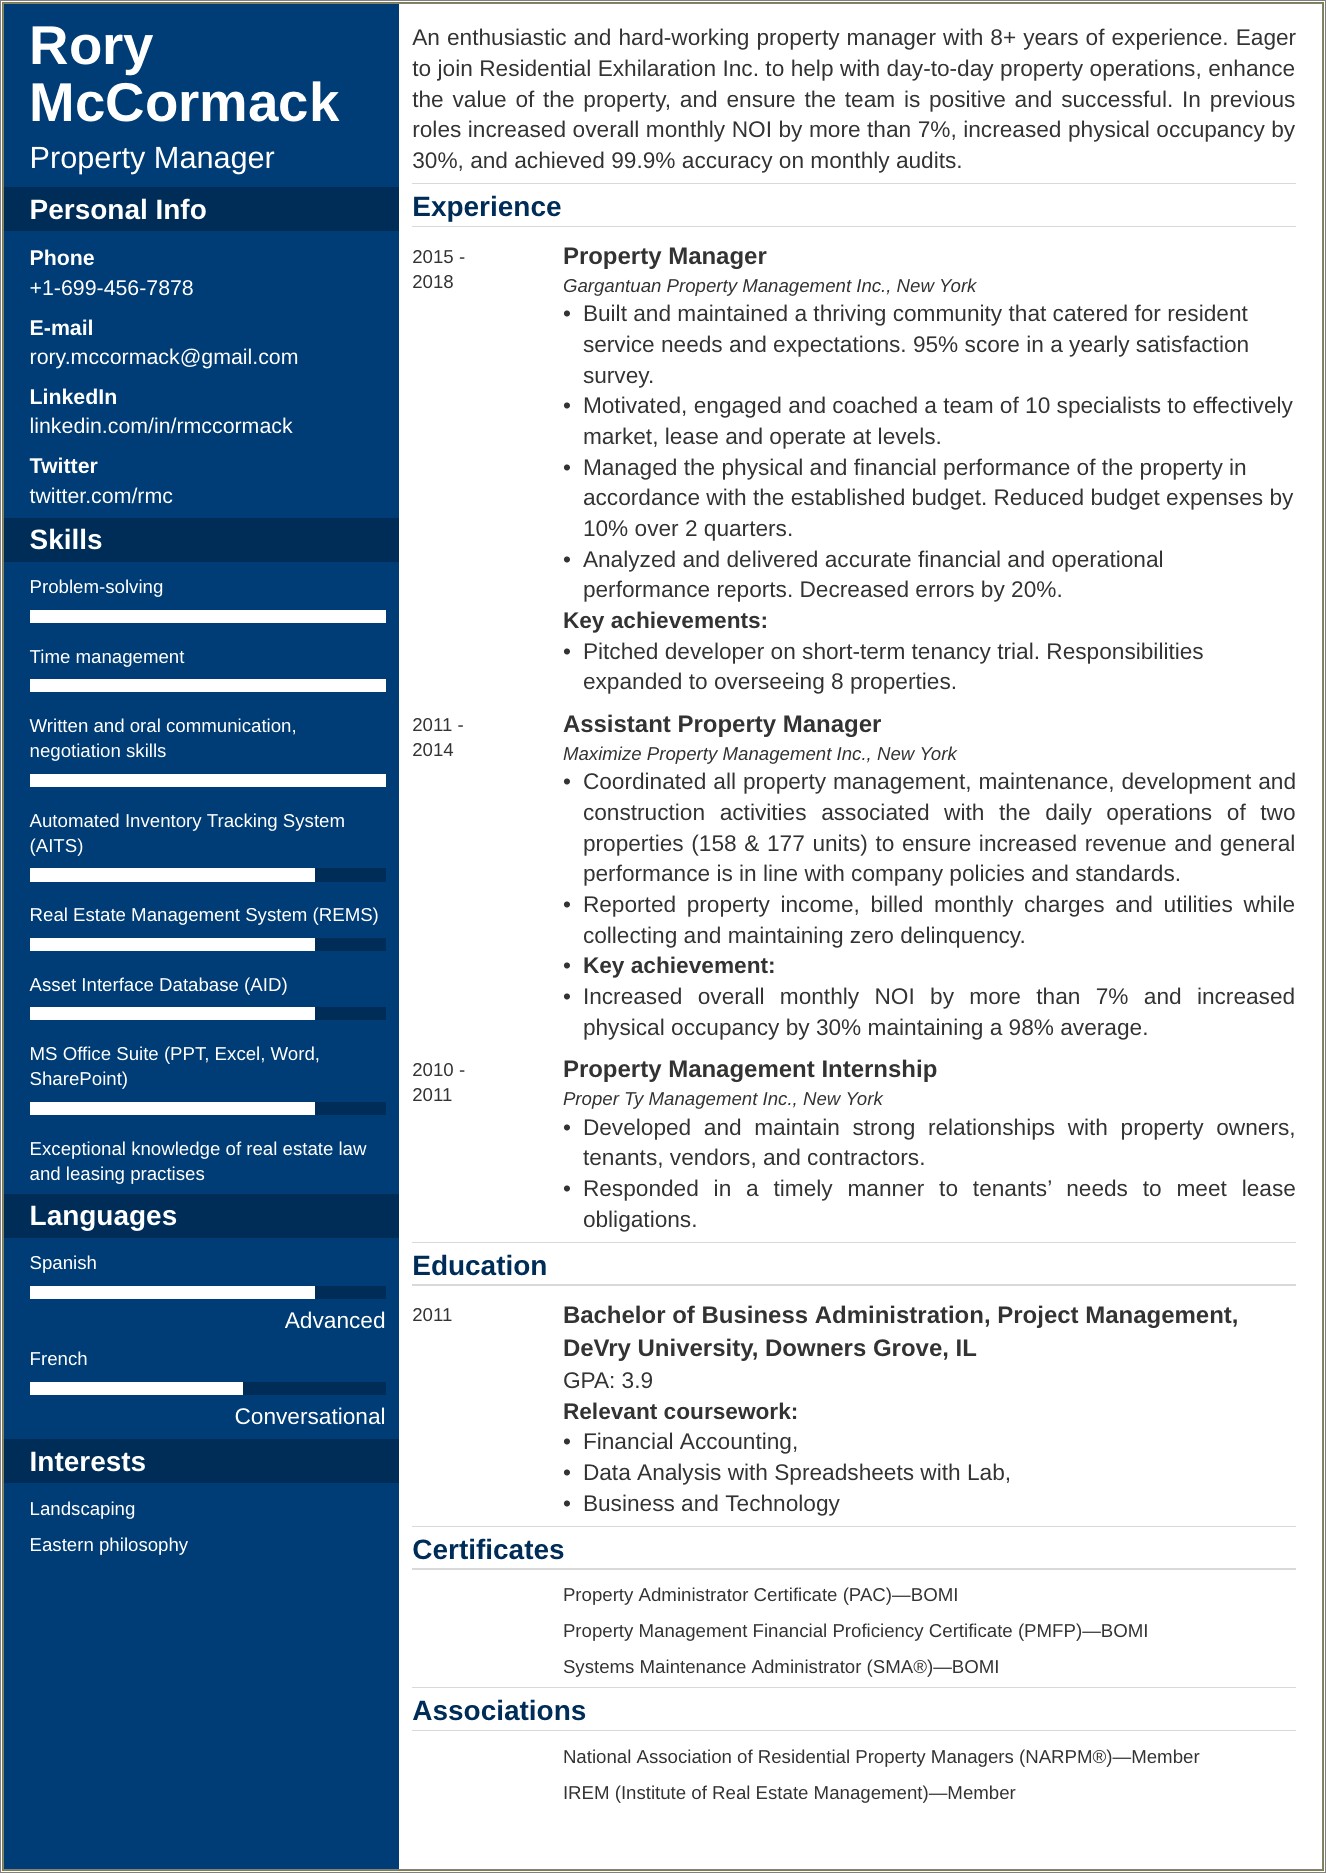 Example Resume For Store Inventory Specialist